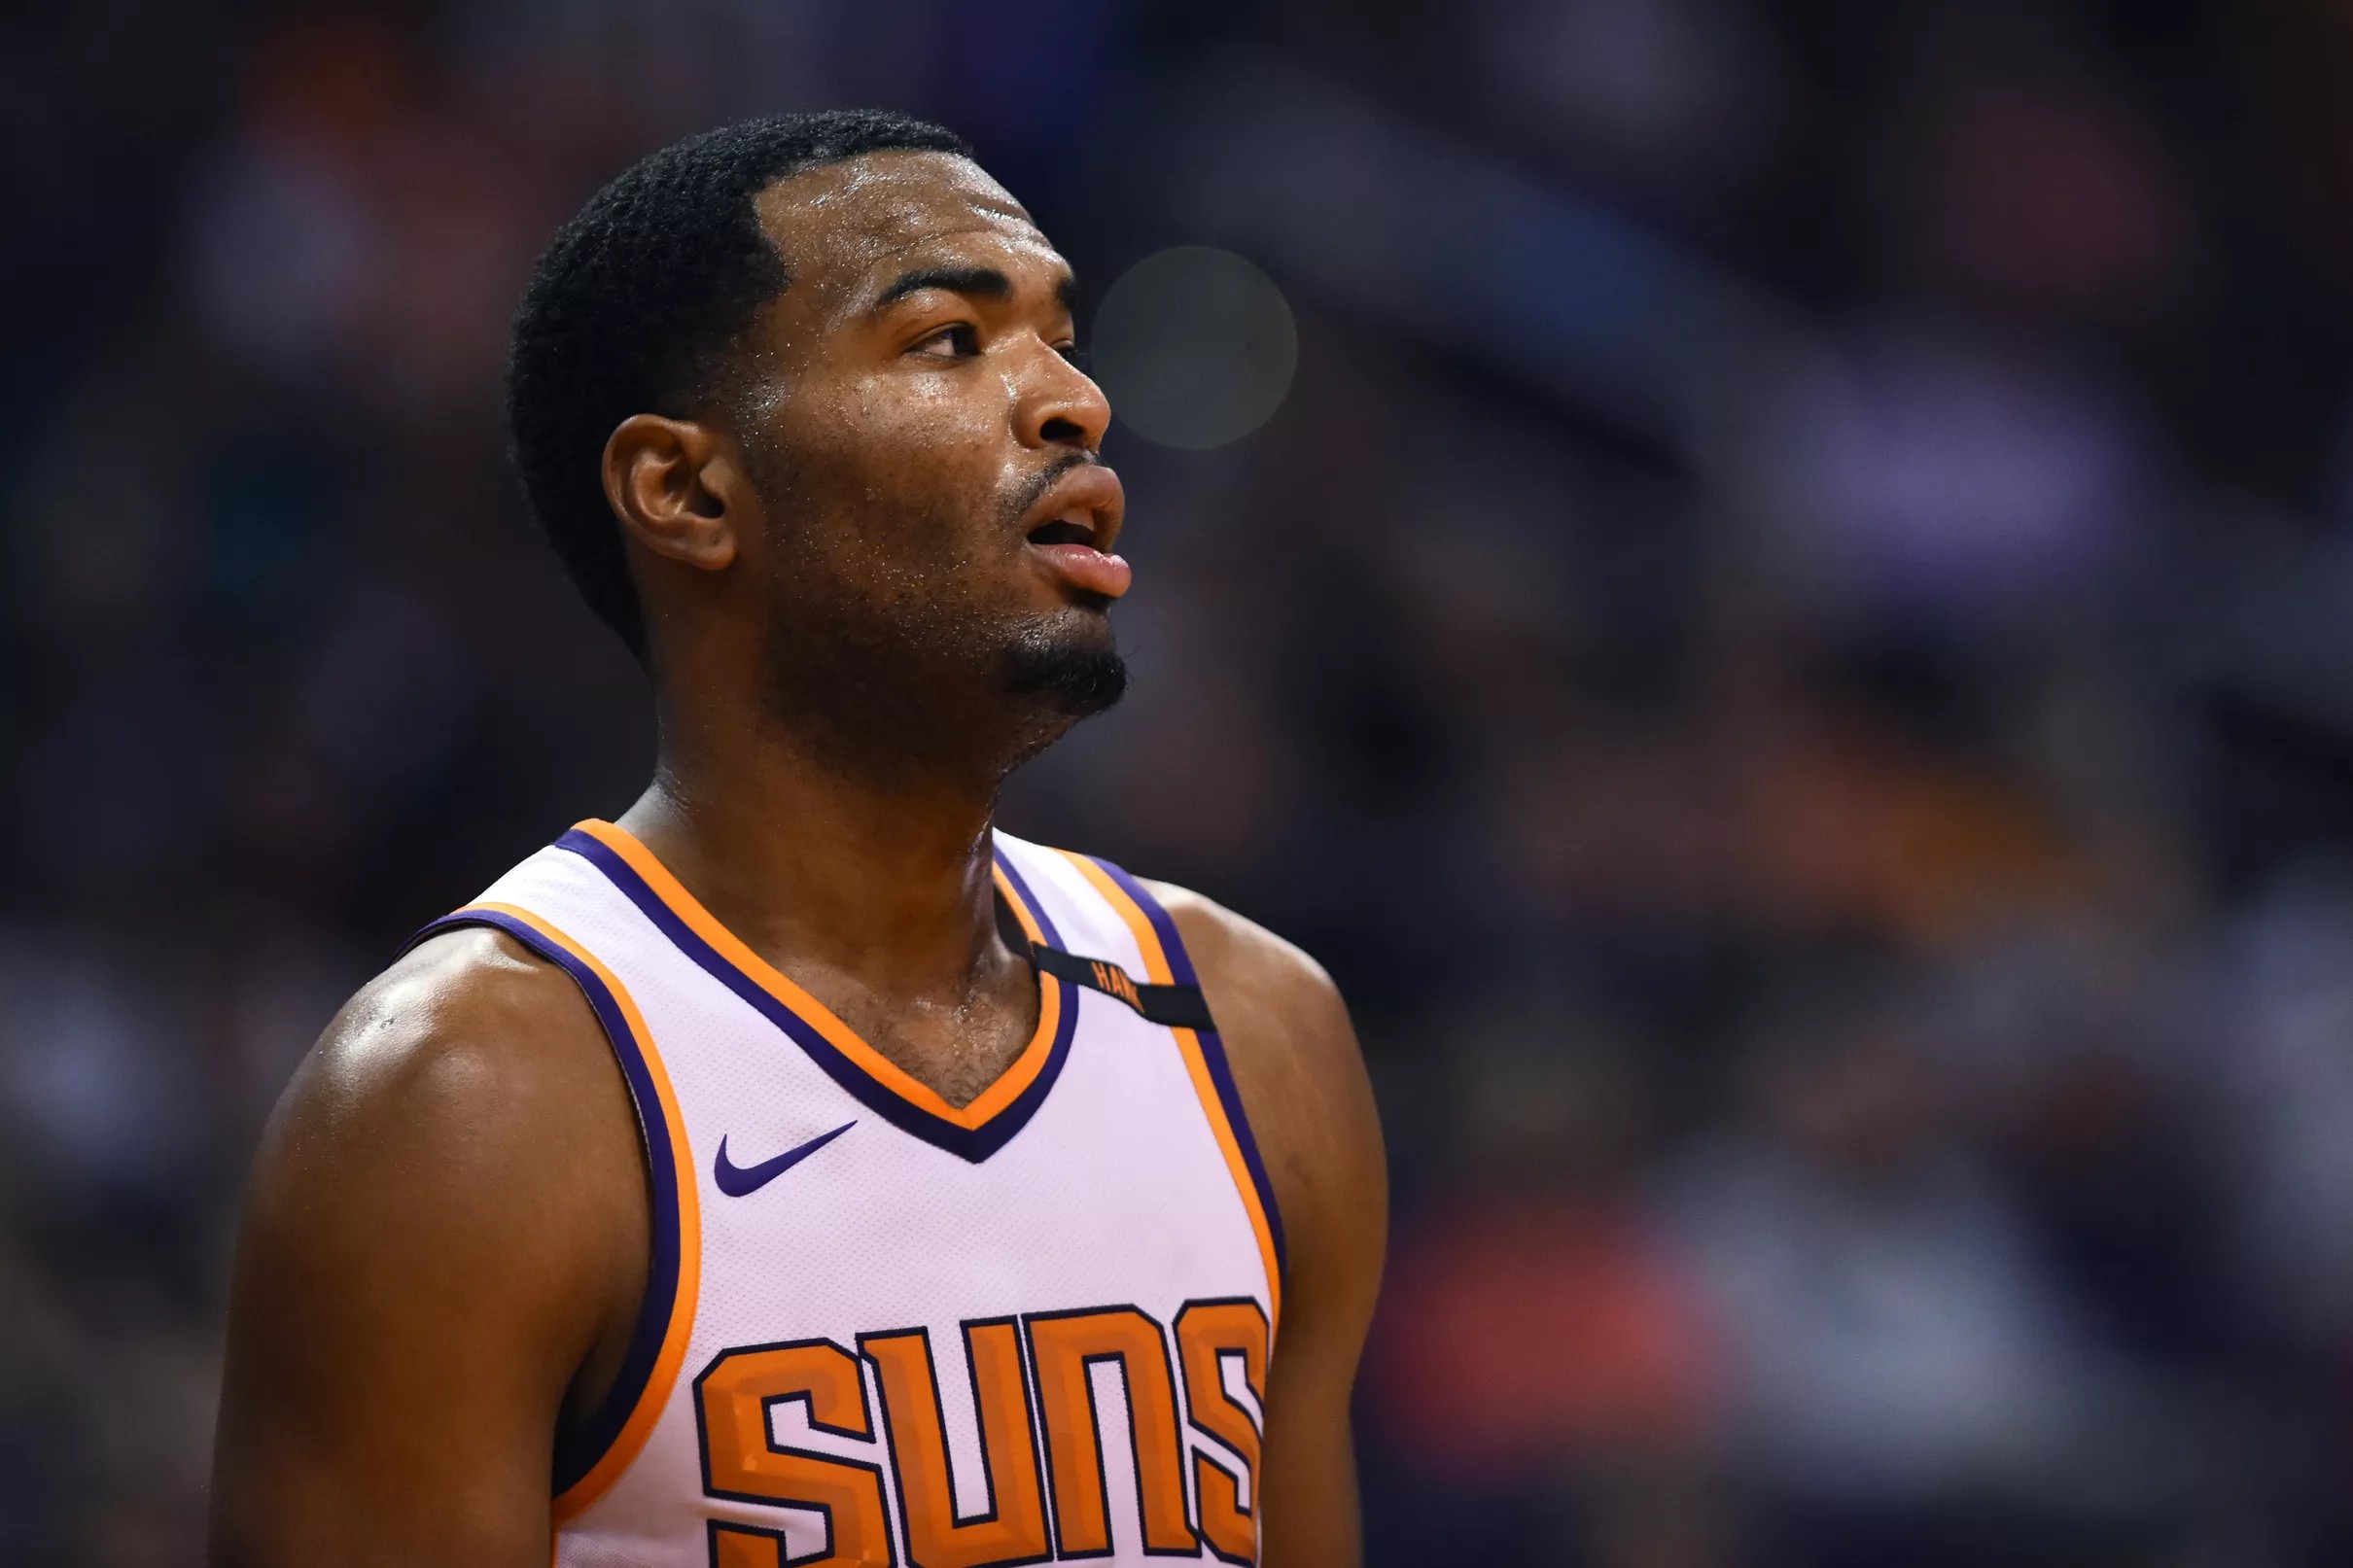 In an increased role, T.J. Warren is showing the rare breed of scorer